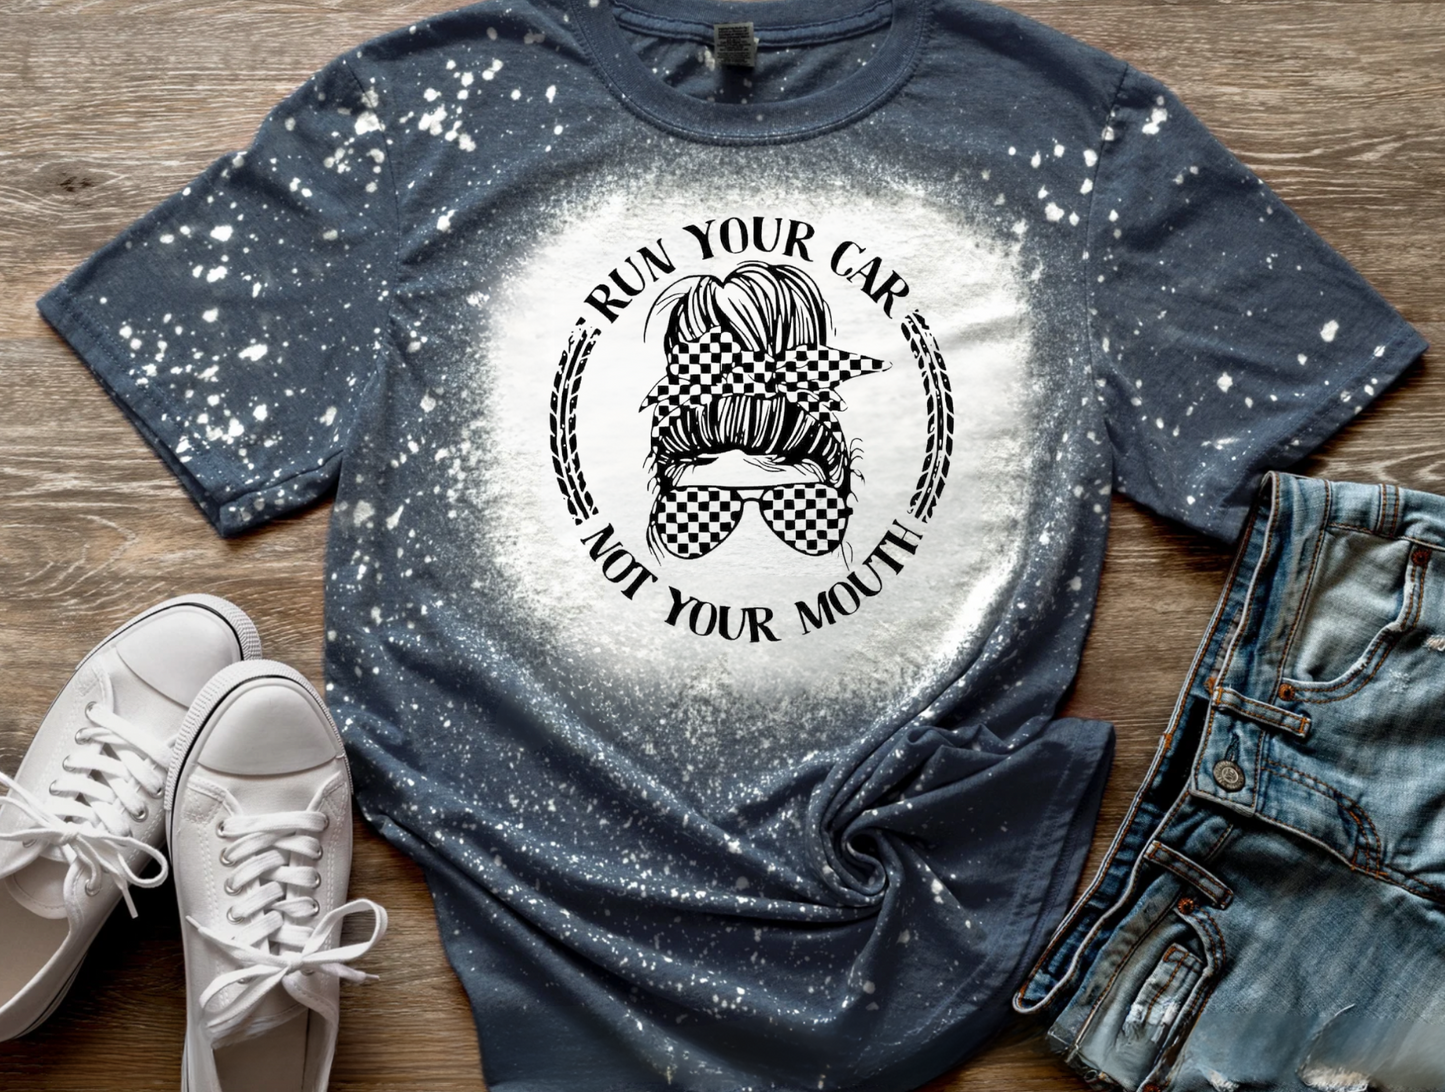 Run Your Car Not Your Mouth Bleached Tee